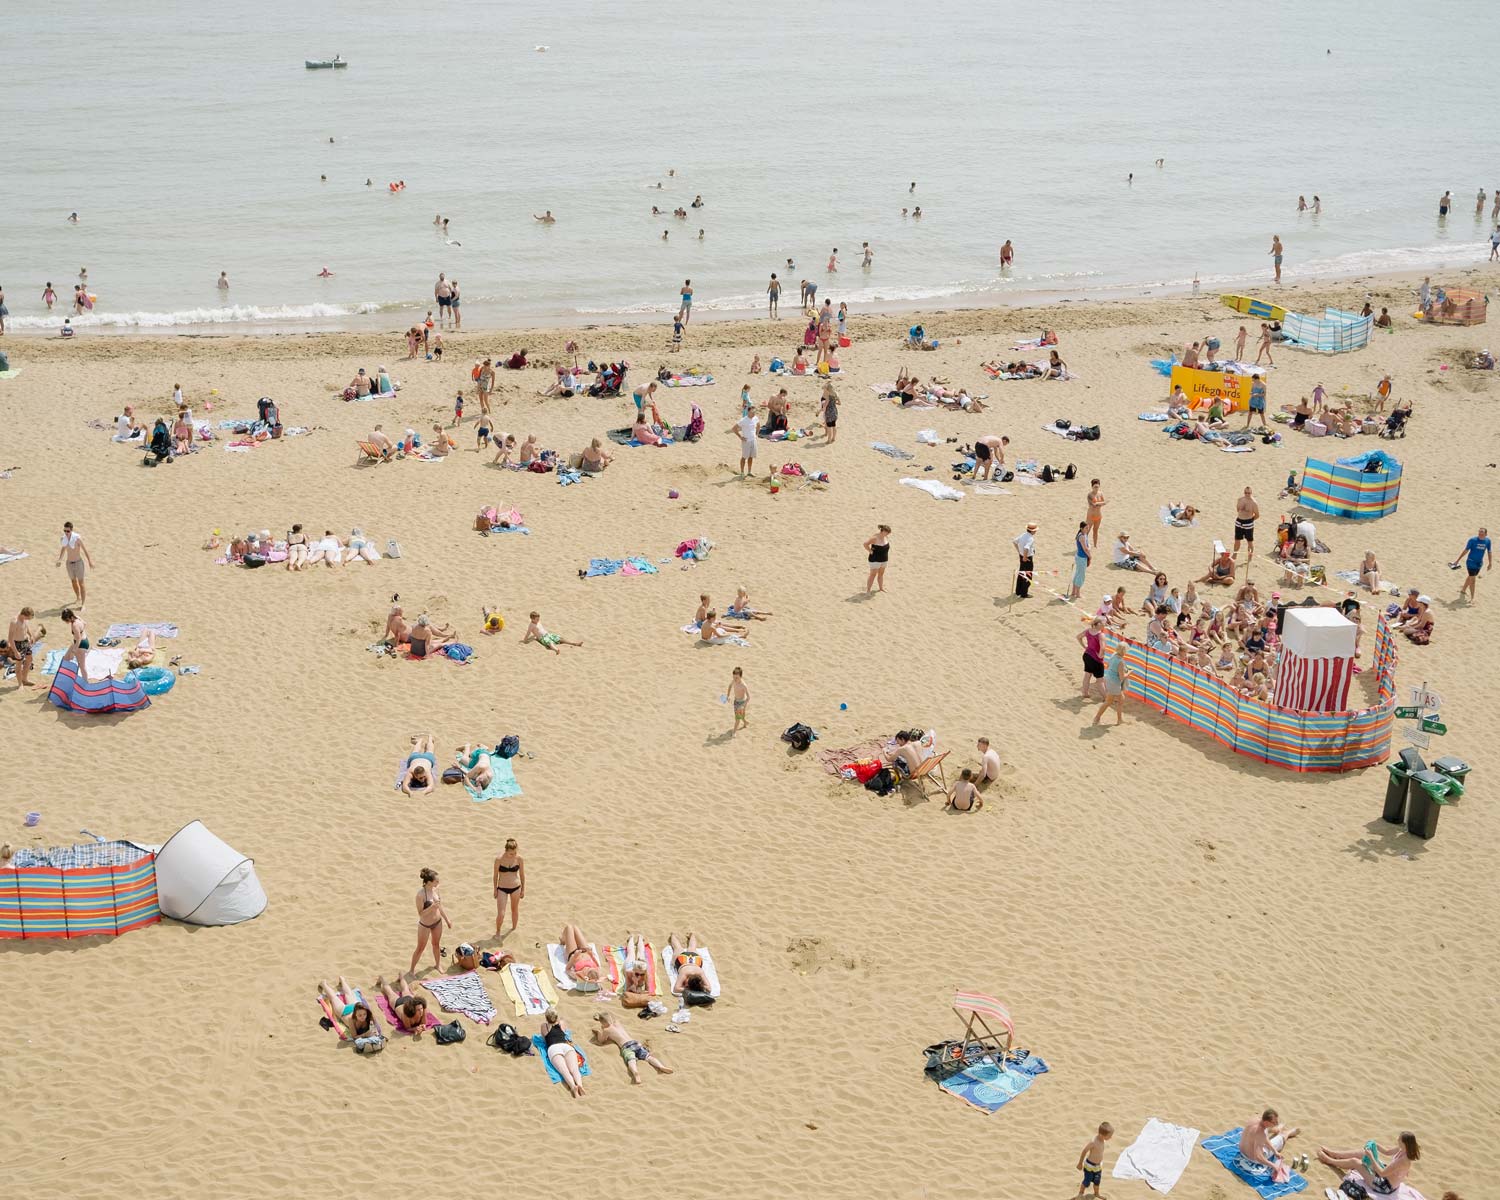 Images: Rob Ball Rob Ball, Viking Bay, Broadstairs, 2014. From Funland by Rob Ball, published by Hoxton Mini Press